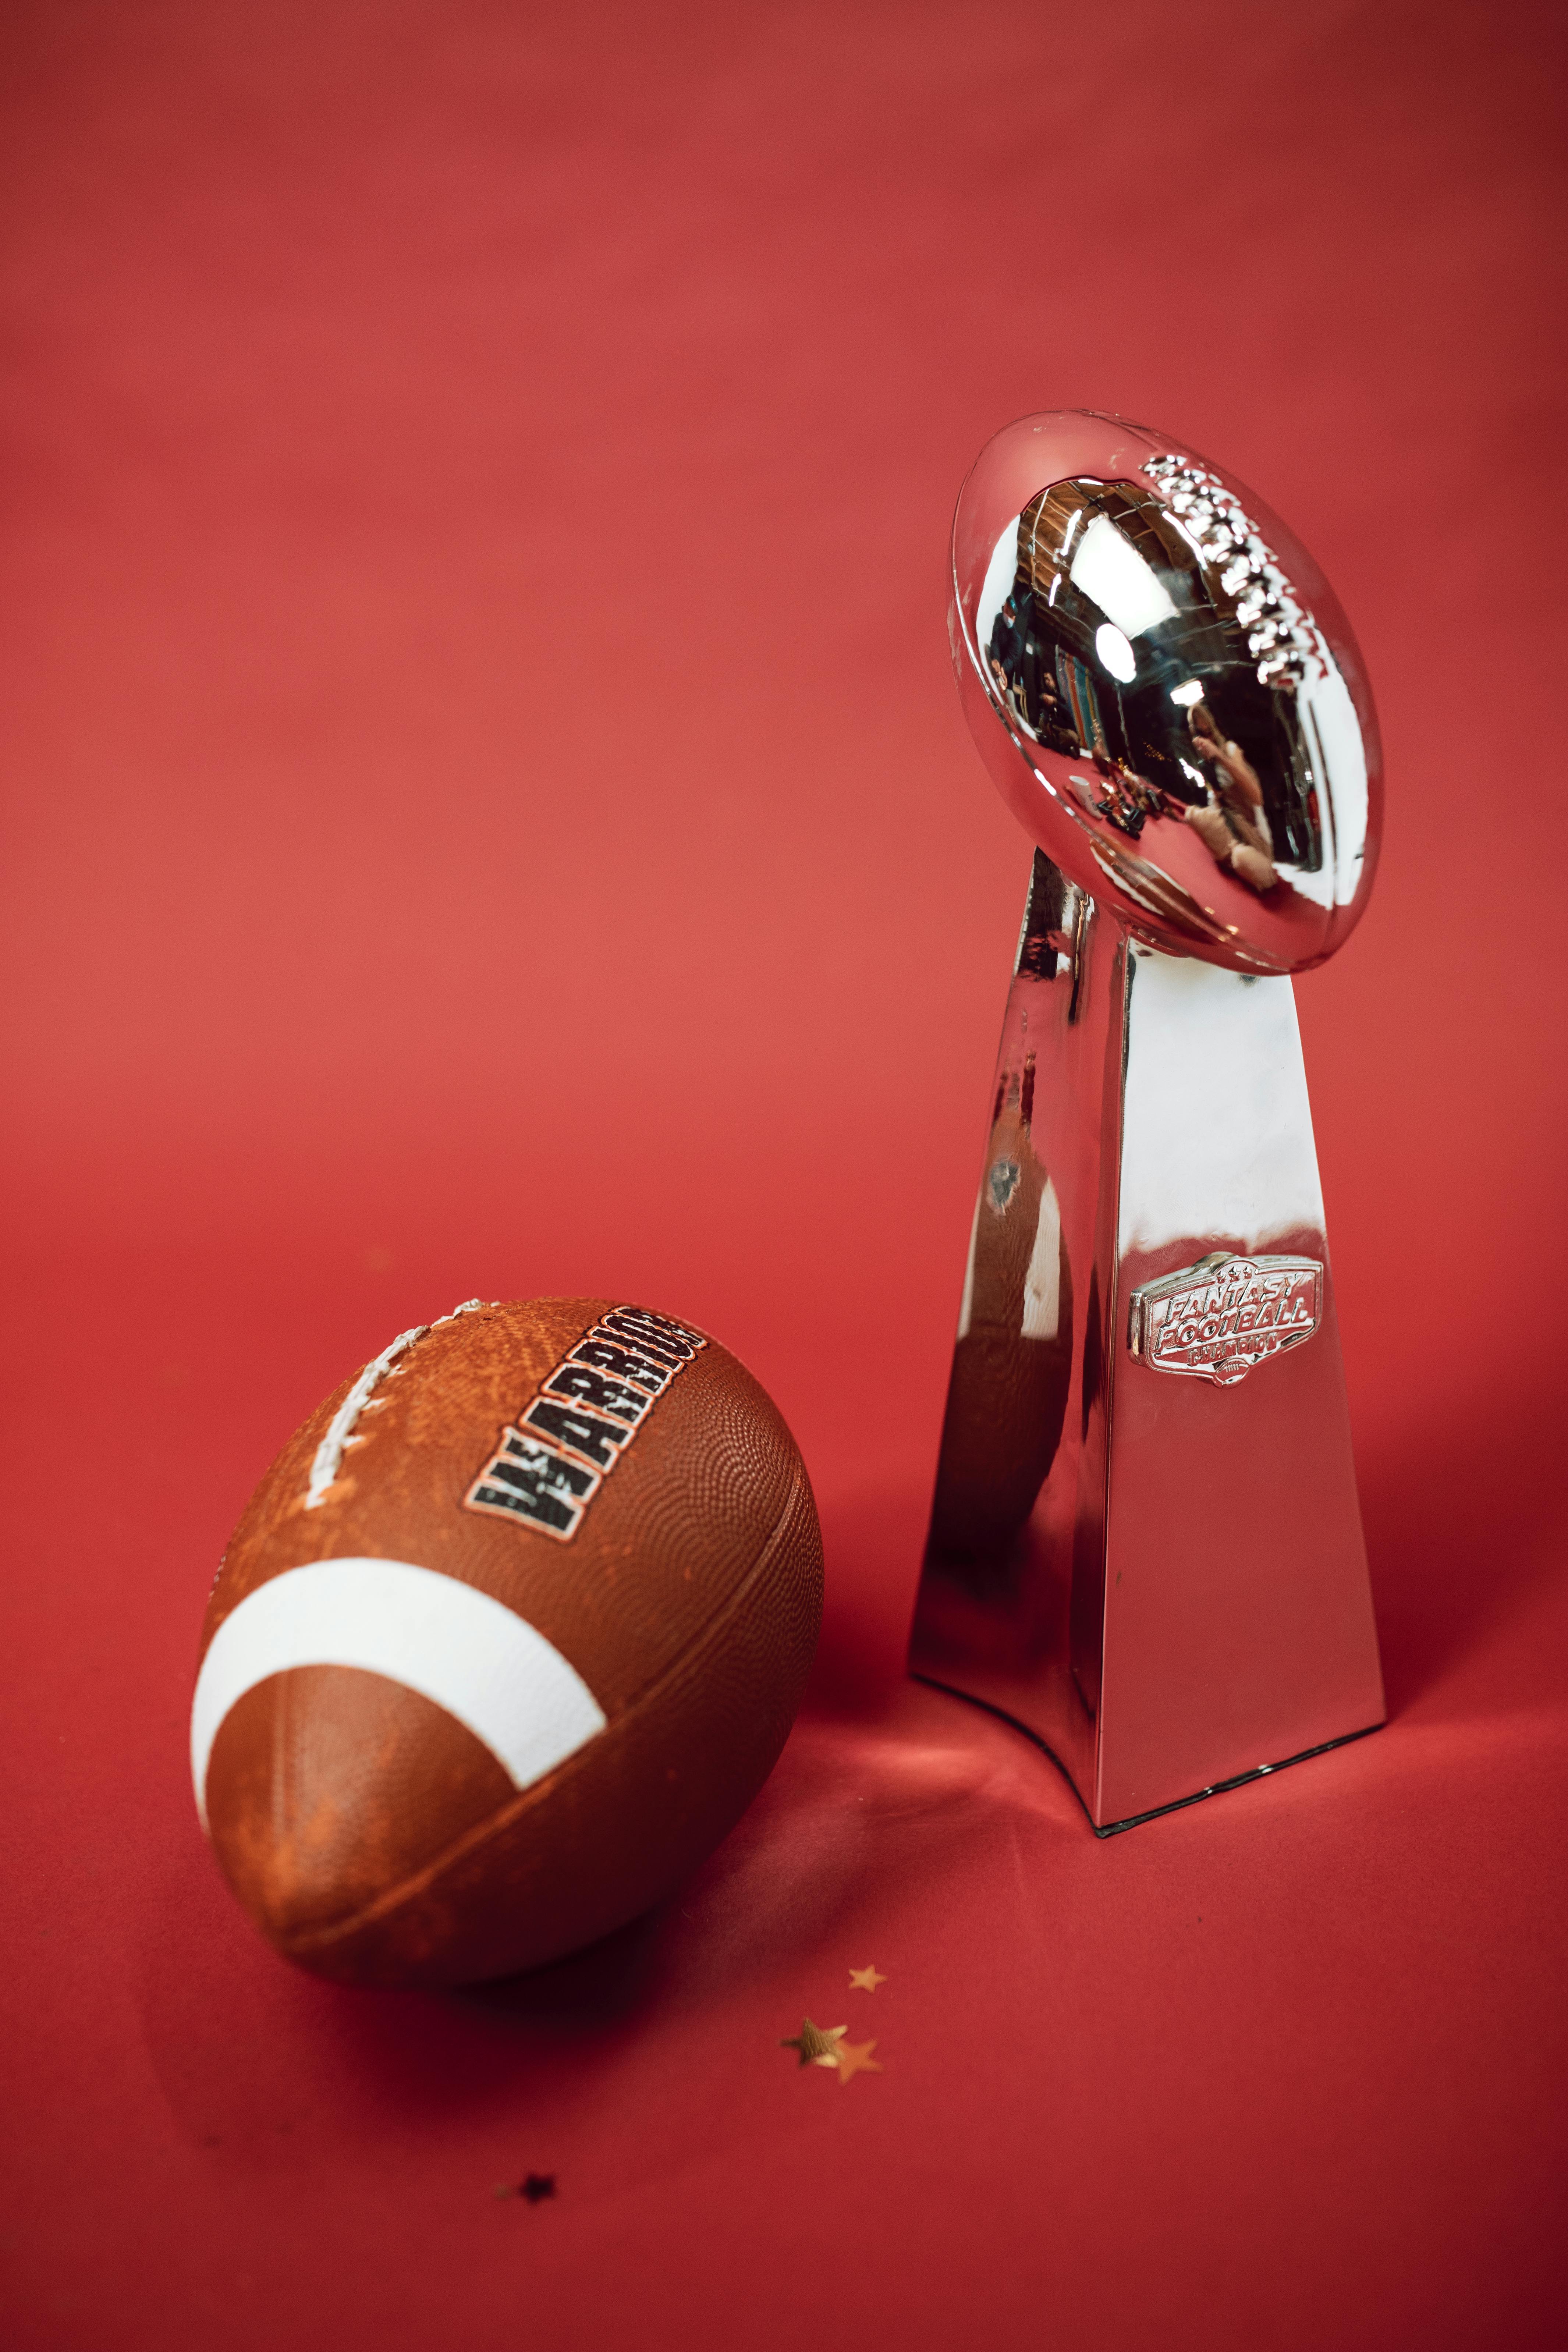 a pigskin football and a silver trophy